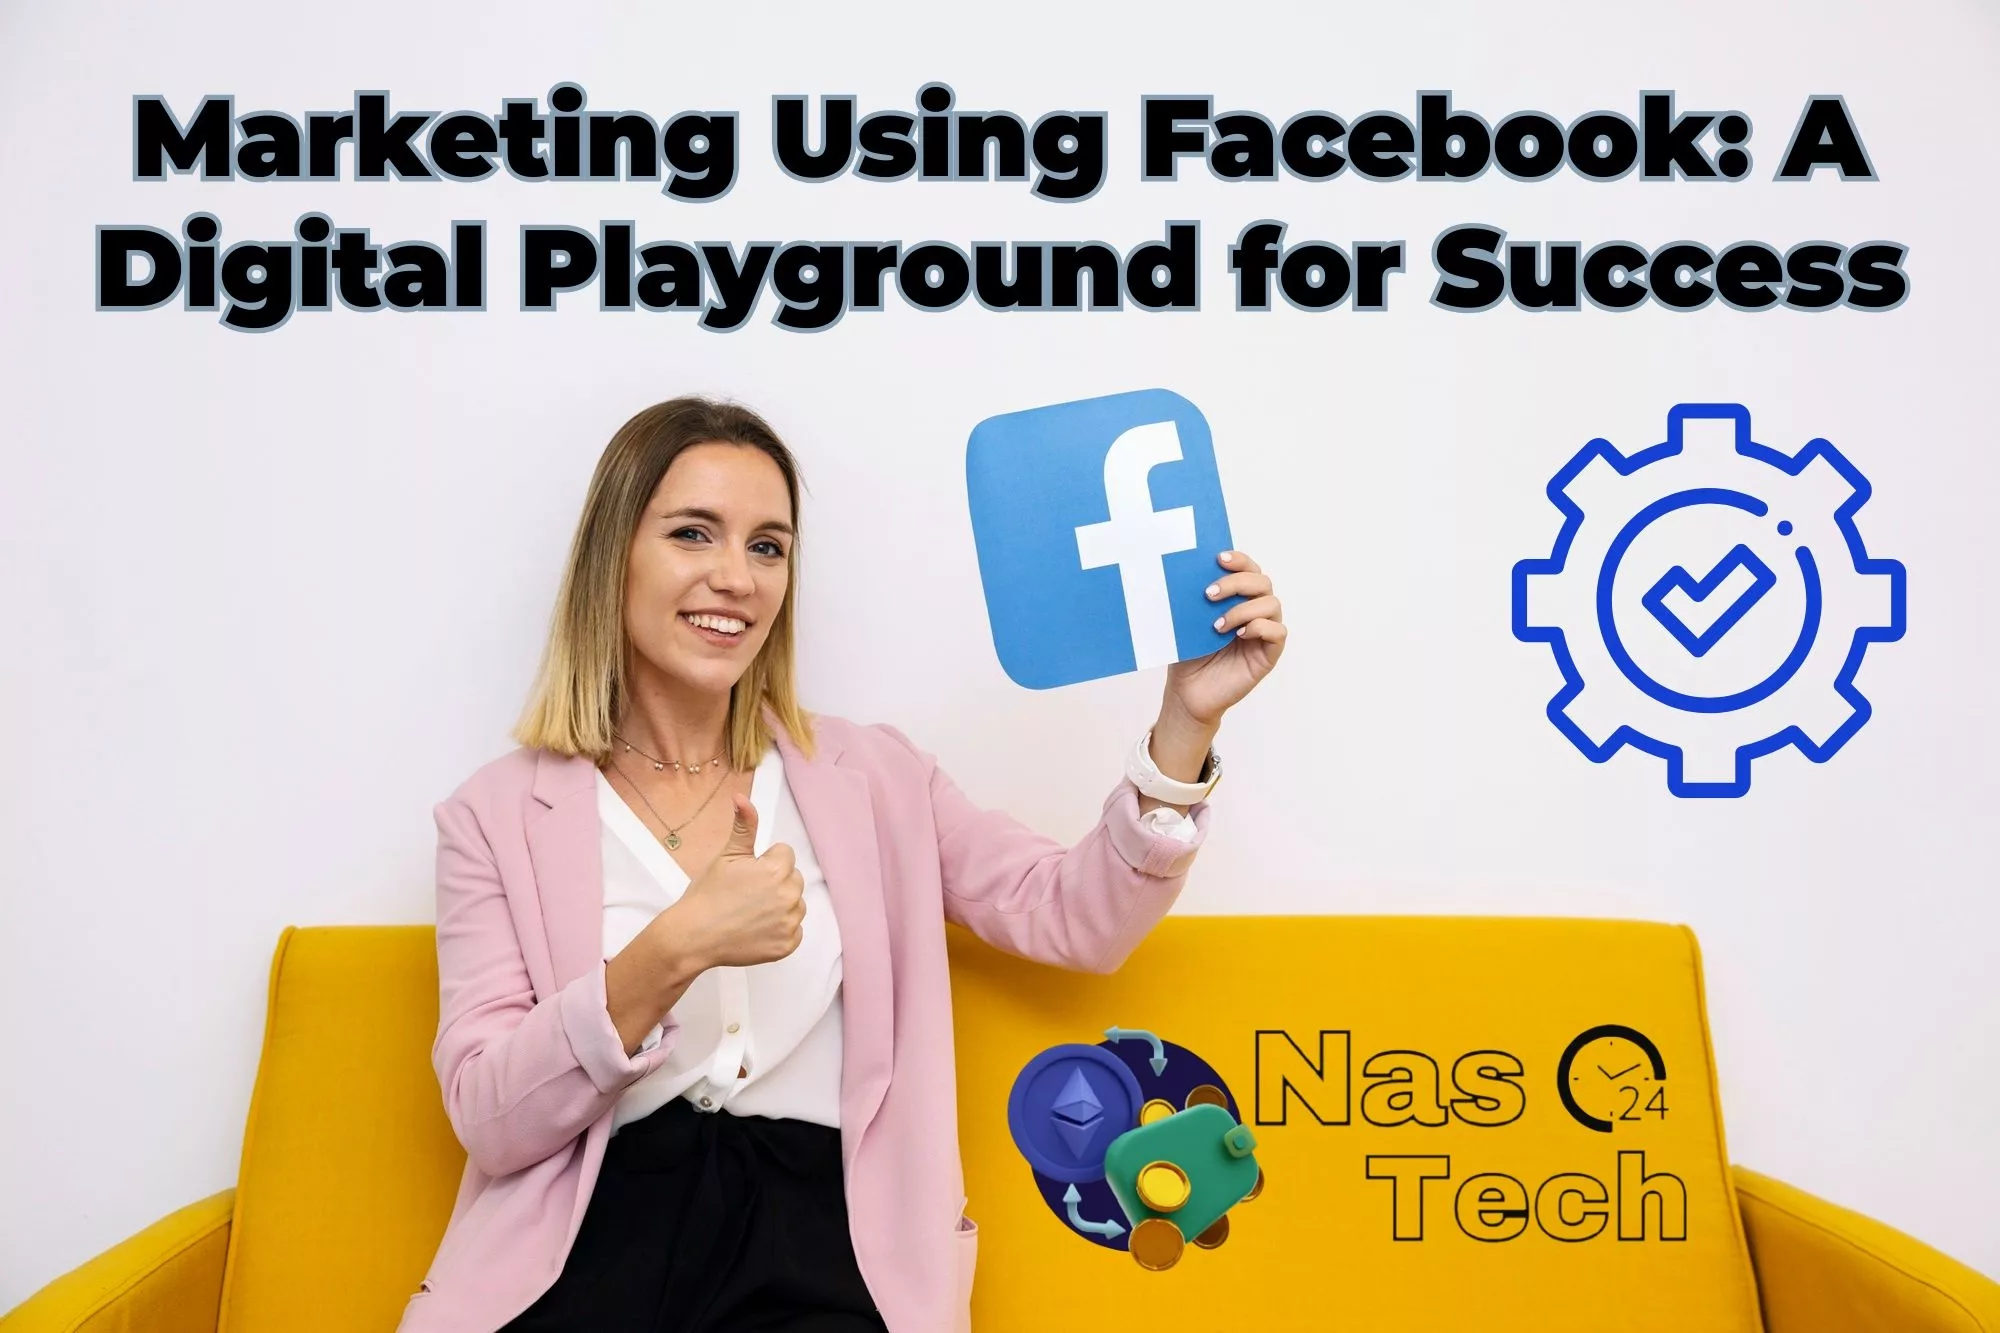 Marketing Using Facebook A Digital Playground for Success by nastech24